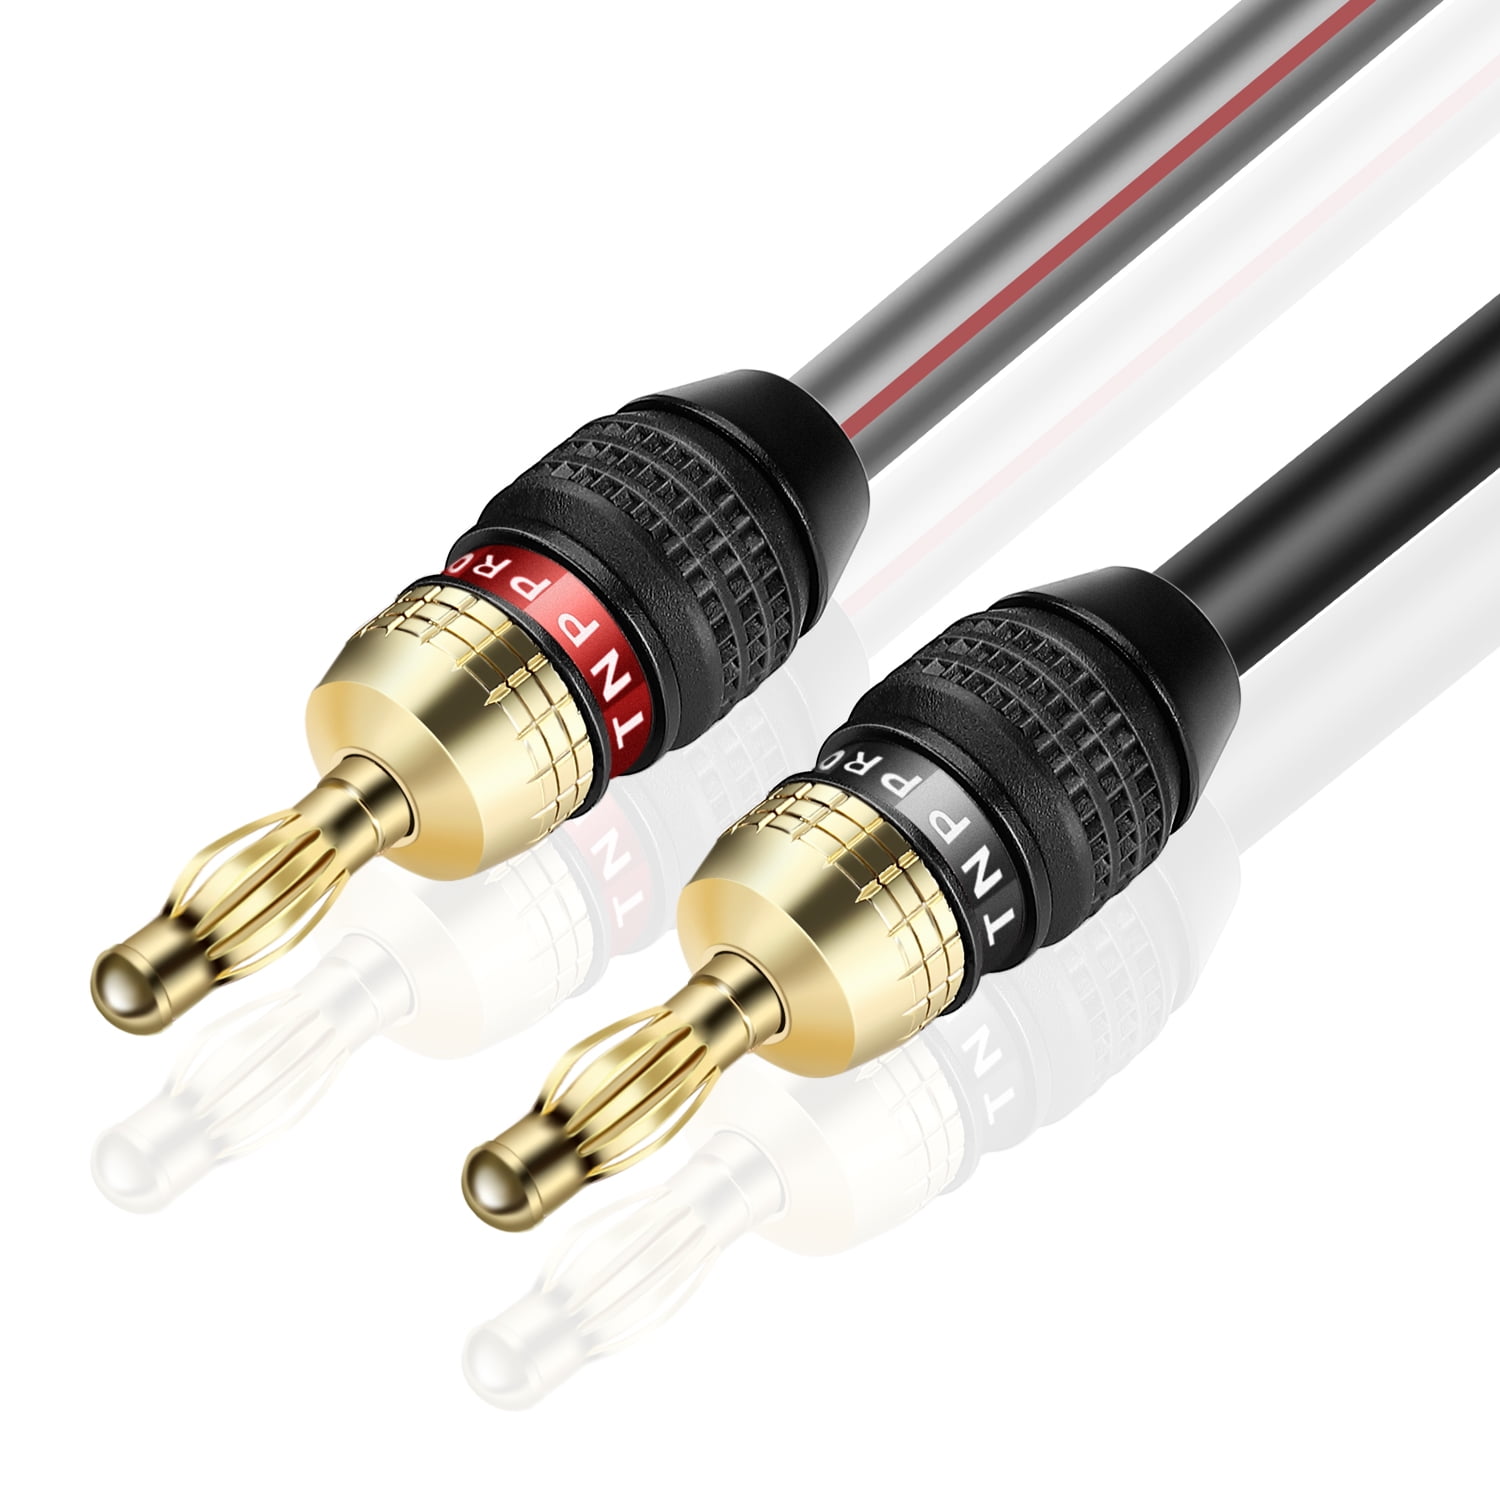 Stereo speaker cable